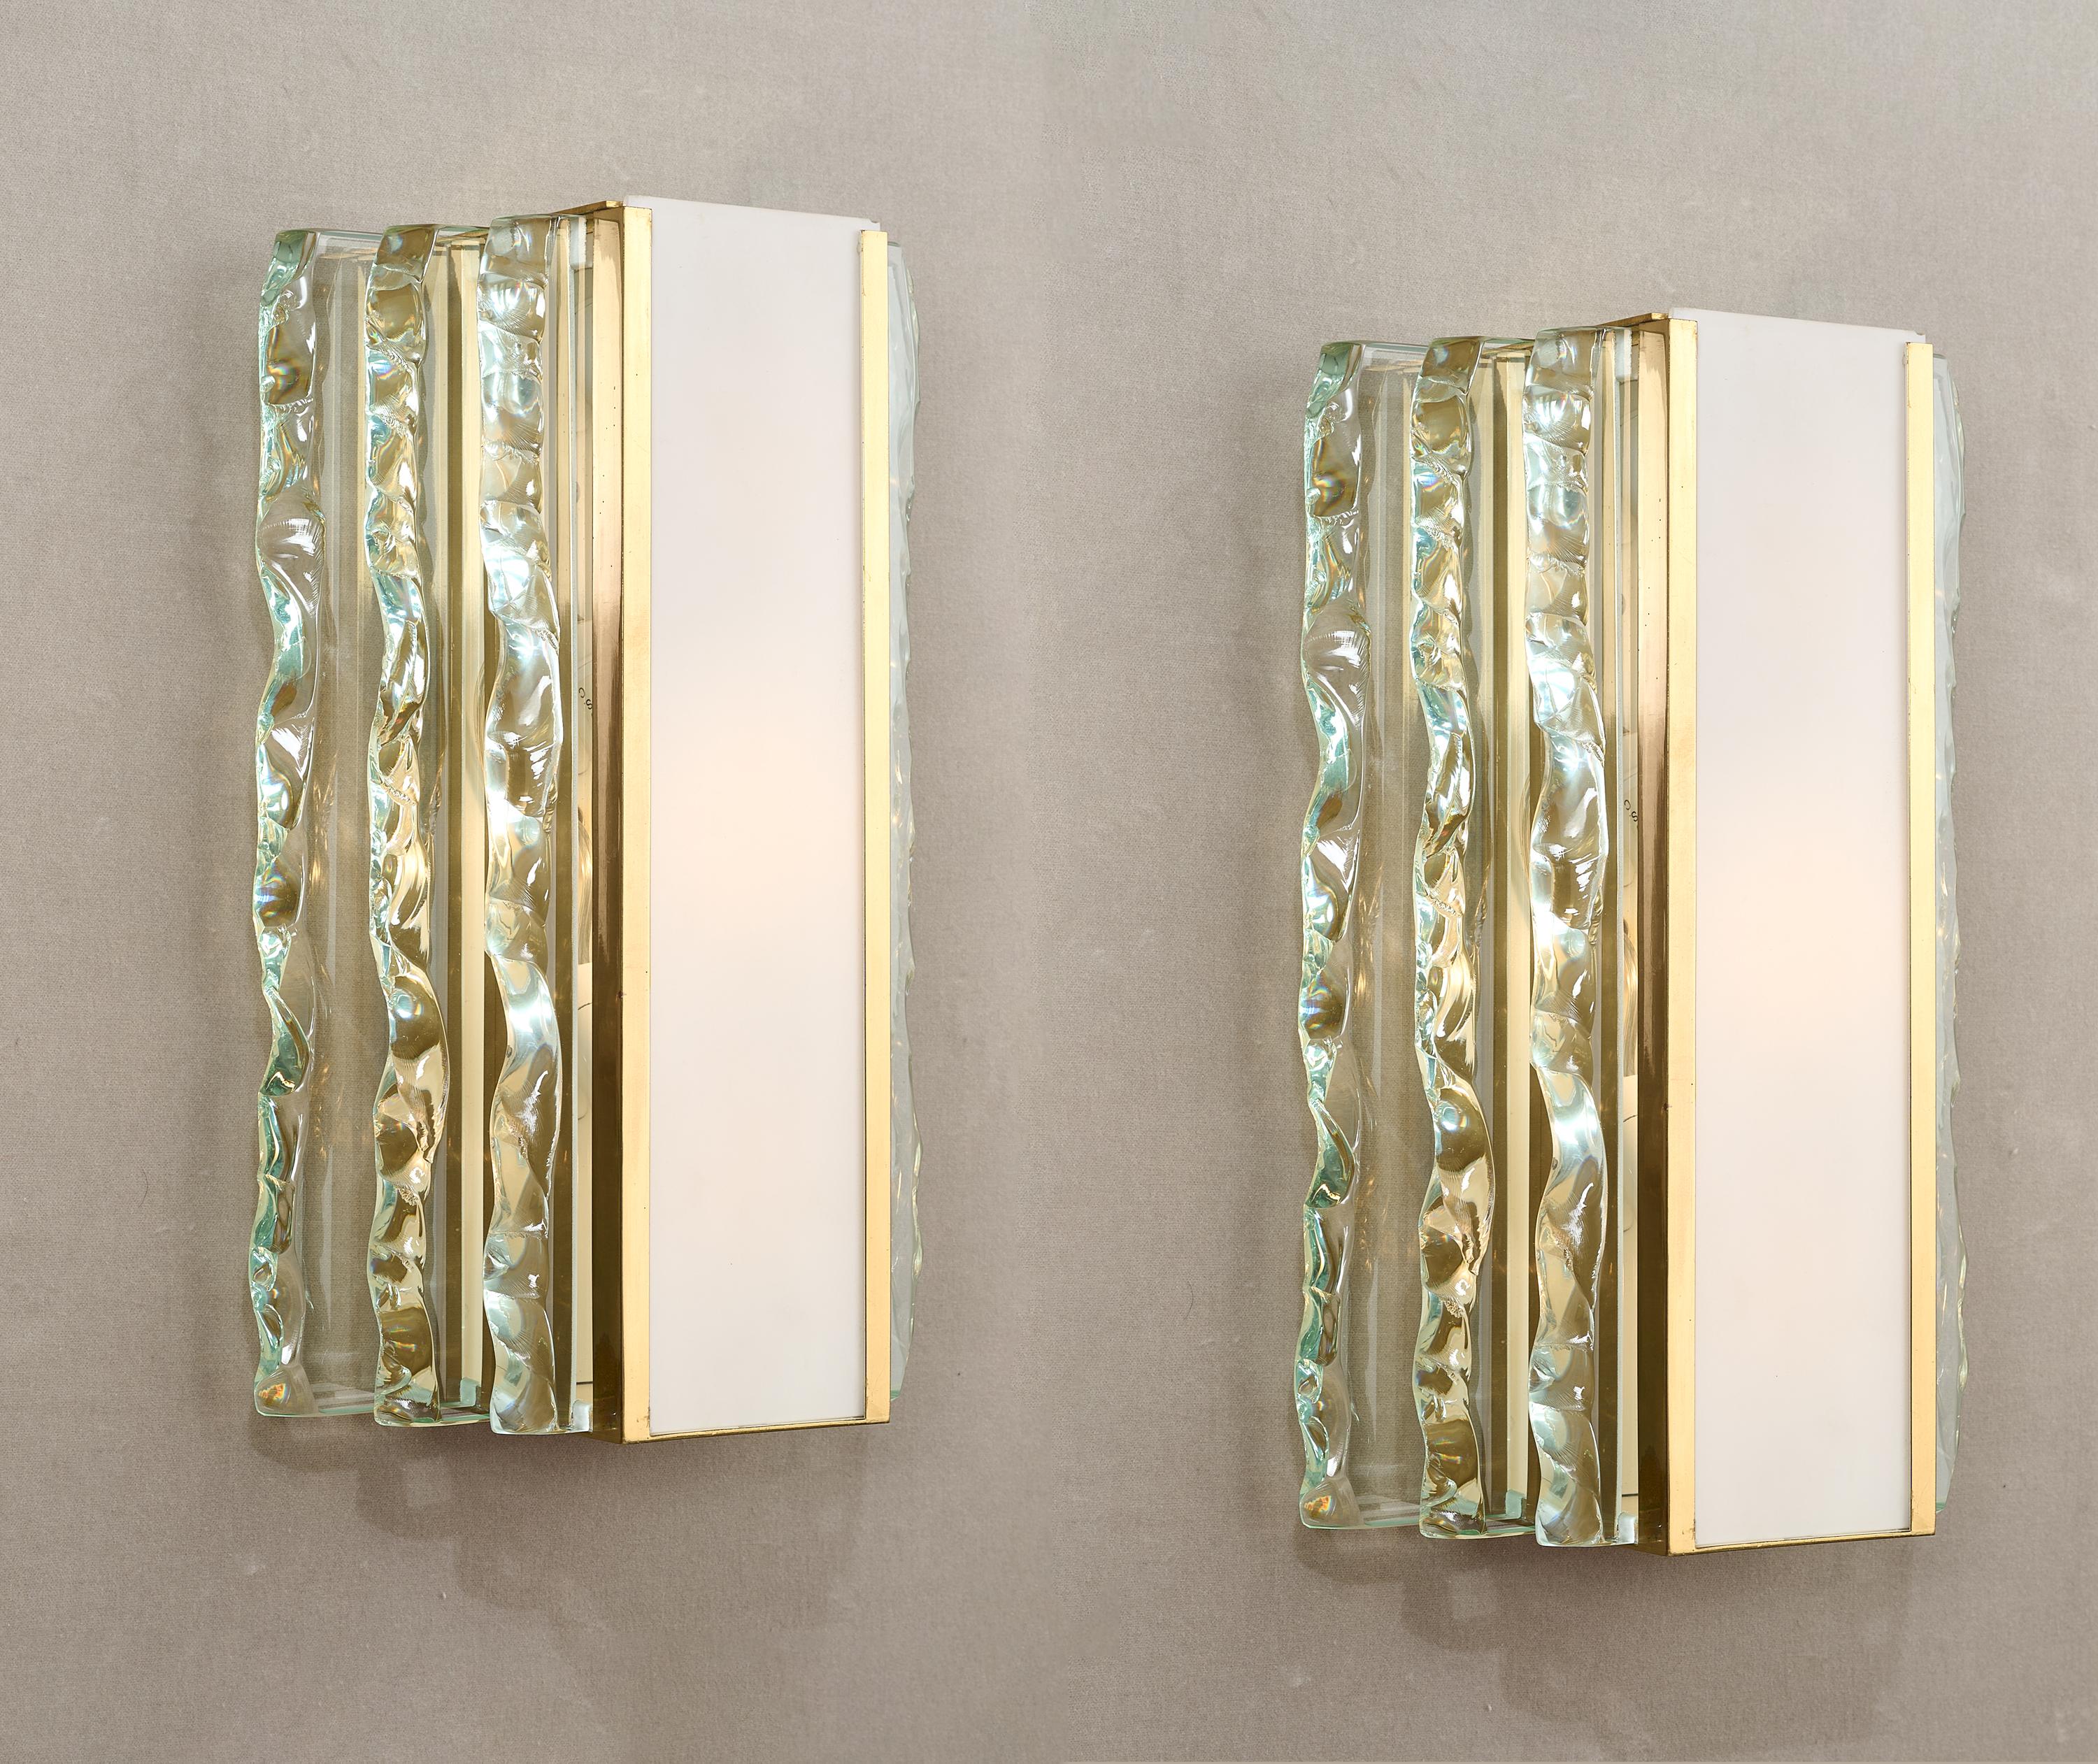 Italian Max Ingrand for Fontana Arte: Pair of Cut Crystal and Brass Sconces, Italy 1954 For Sale